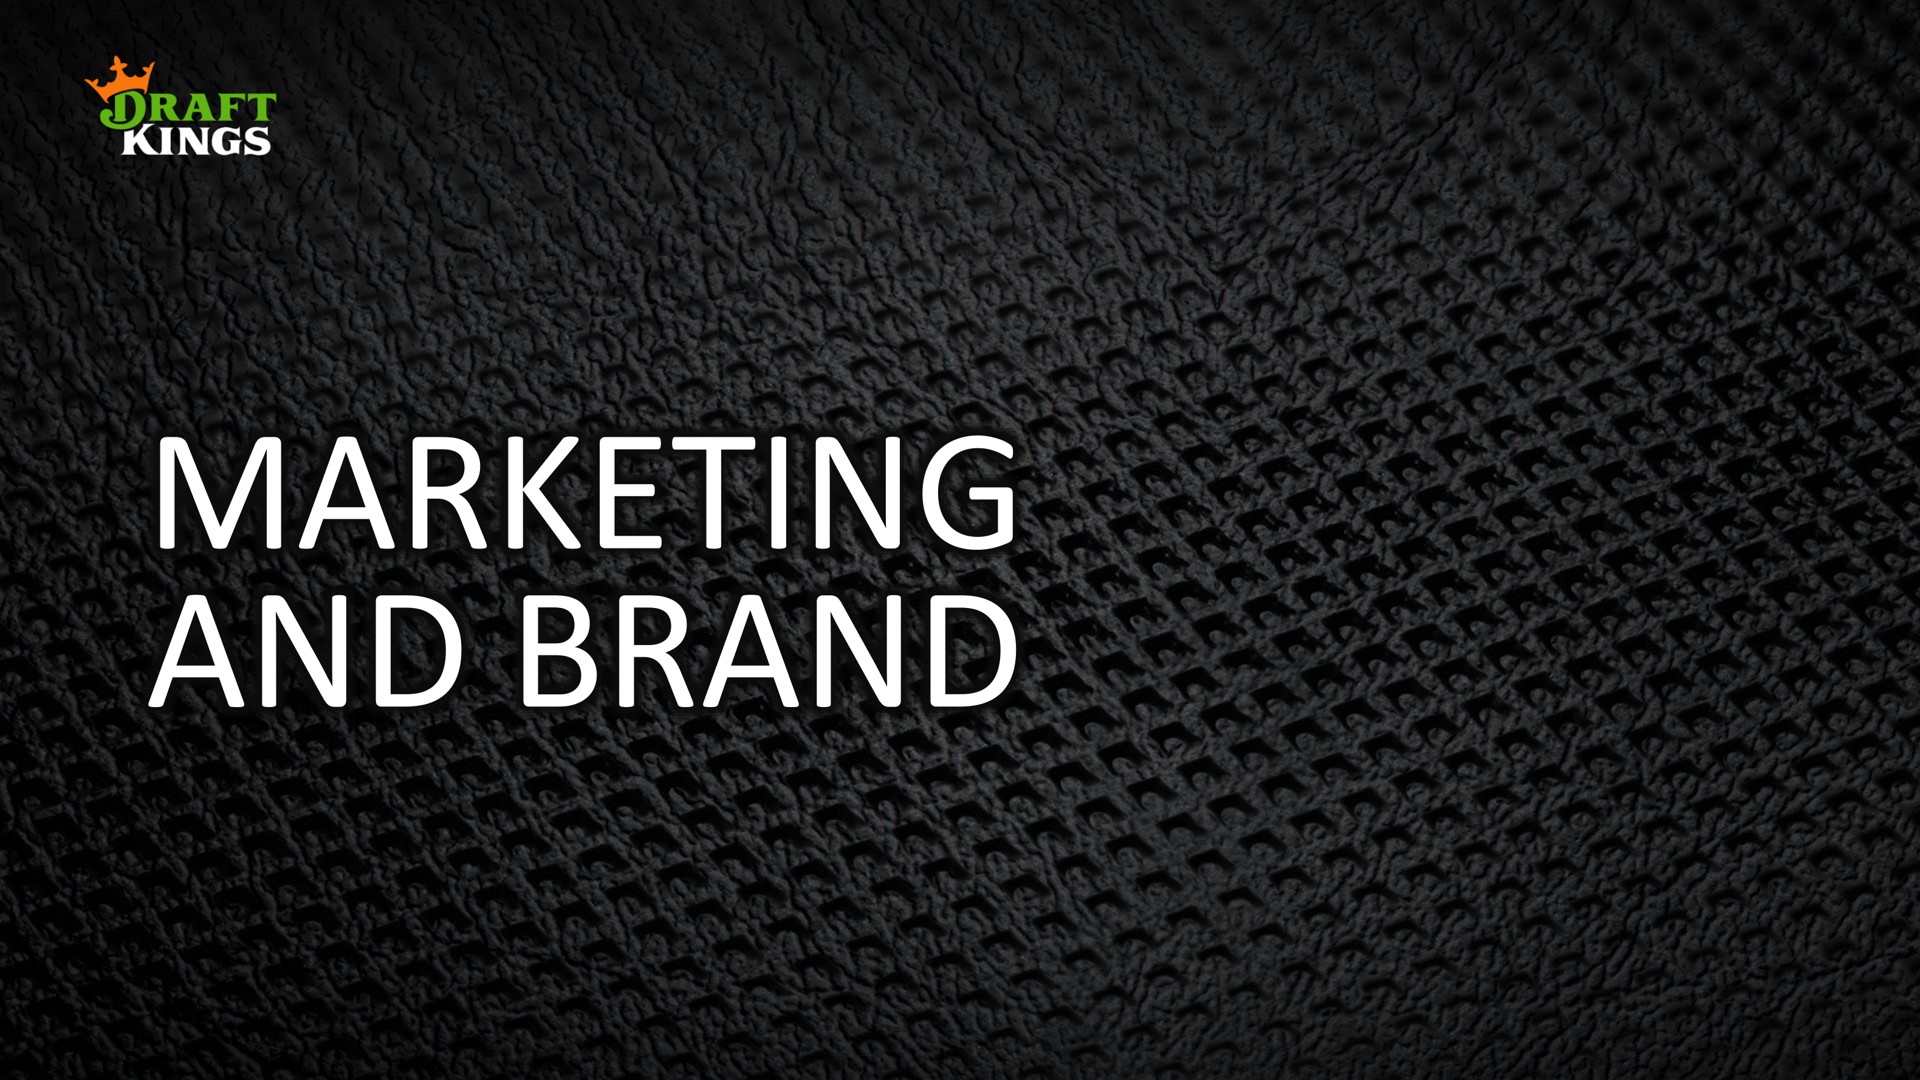 marketing and brand van by | DraftKings